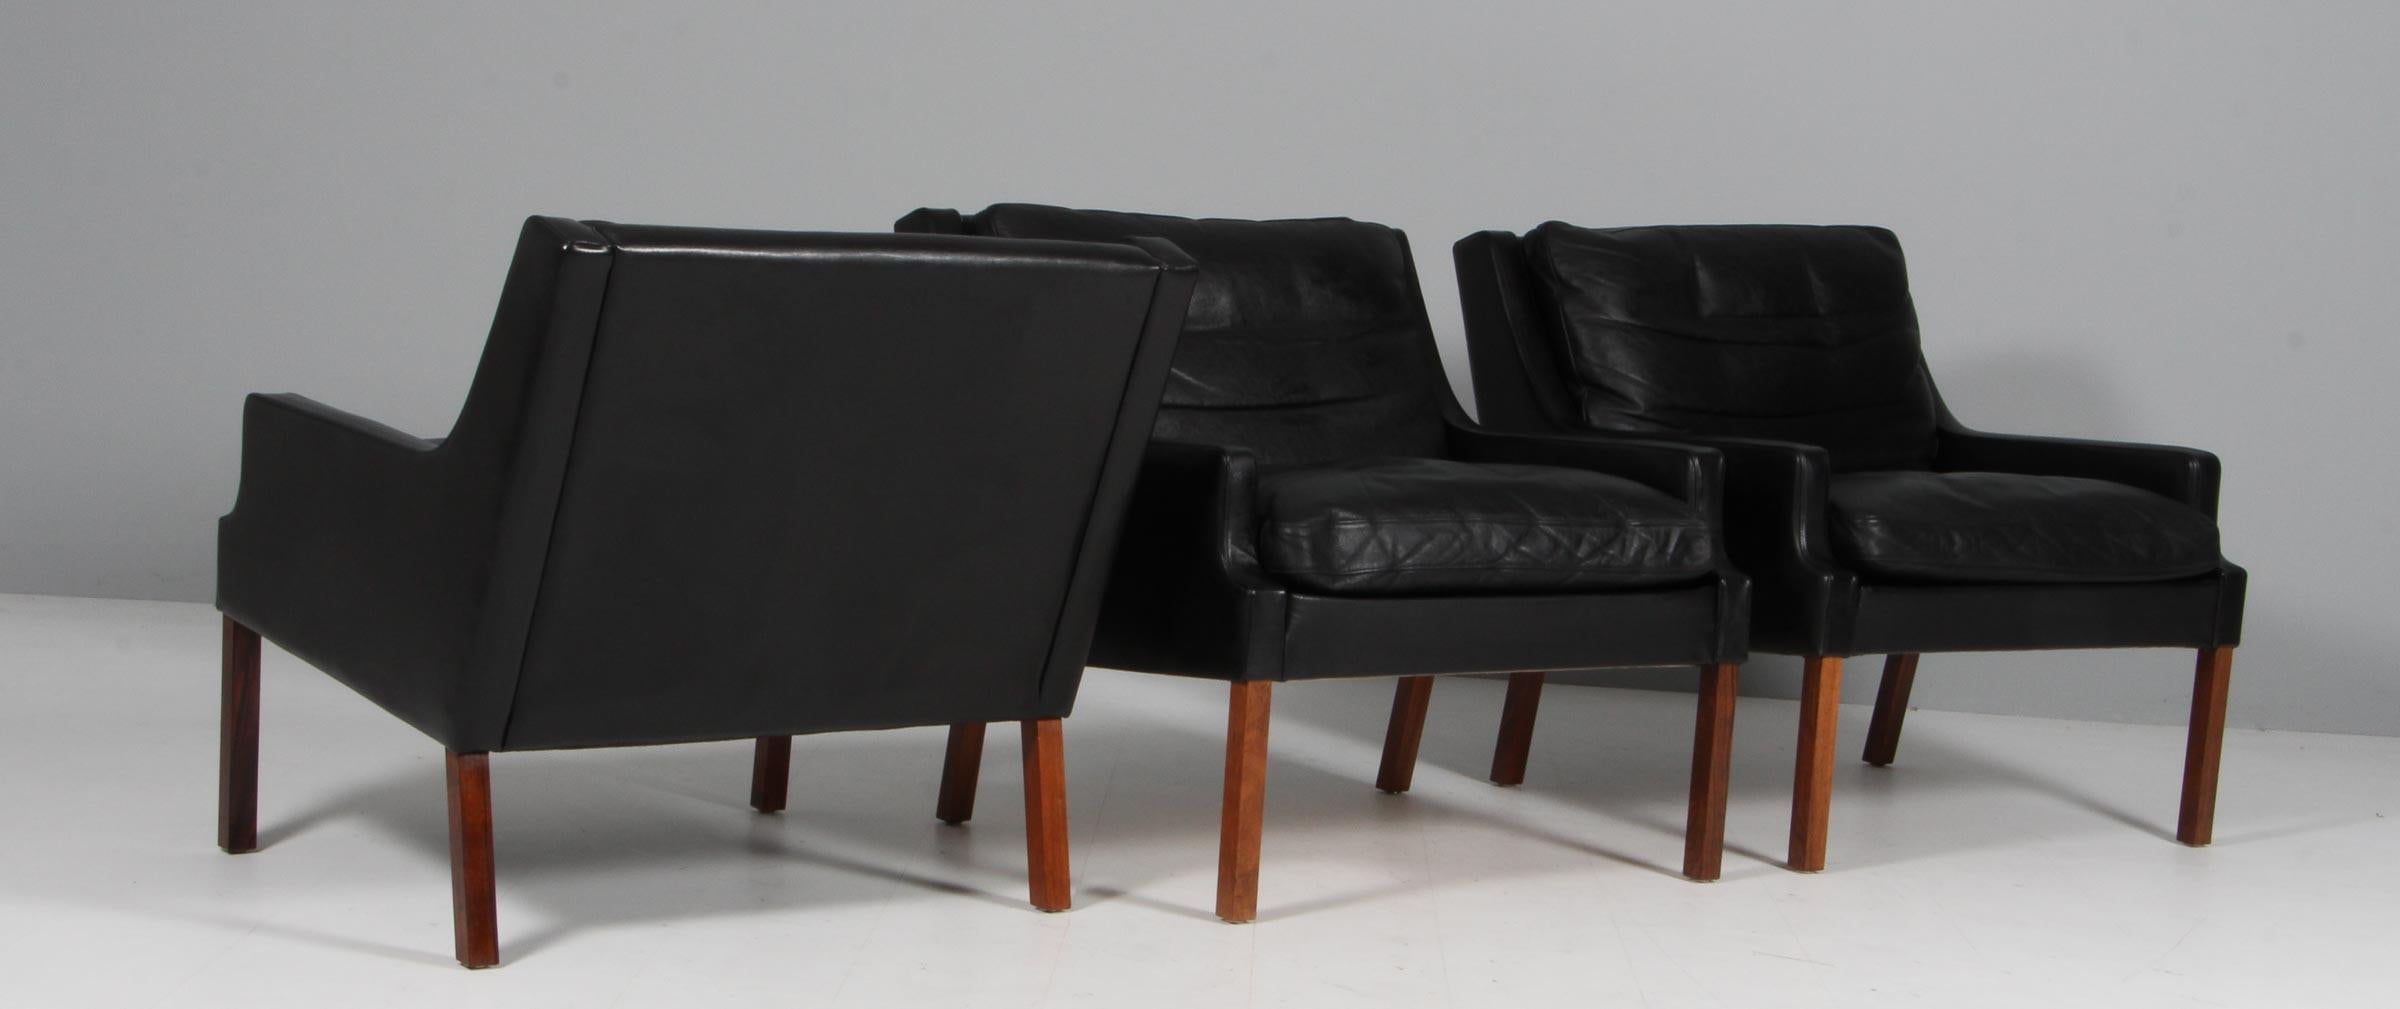 Rud Thygensen lounge chairs of leather, 1960s In Good Condition For Sale In Esbjerg, DK